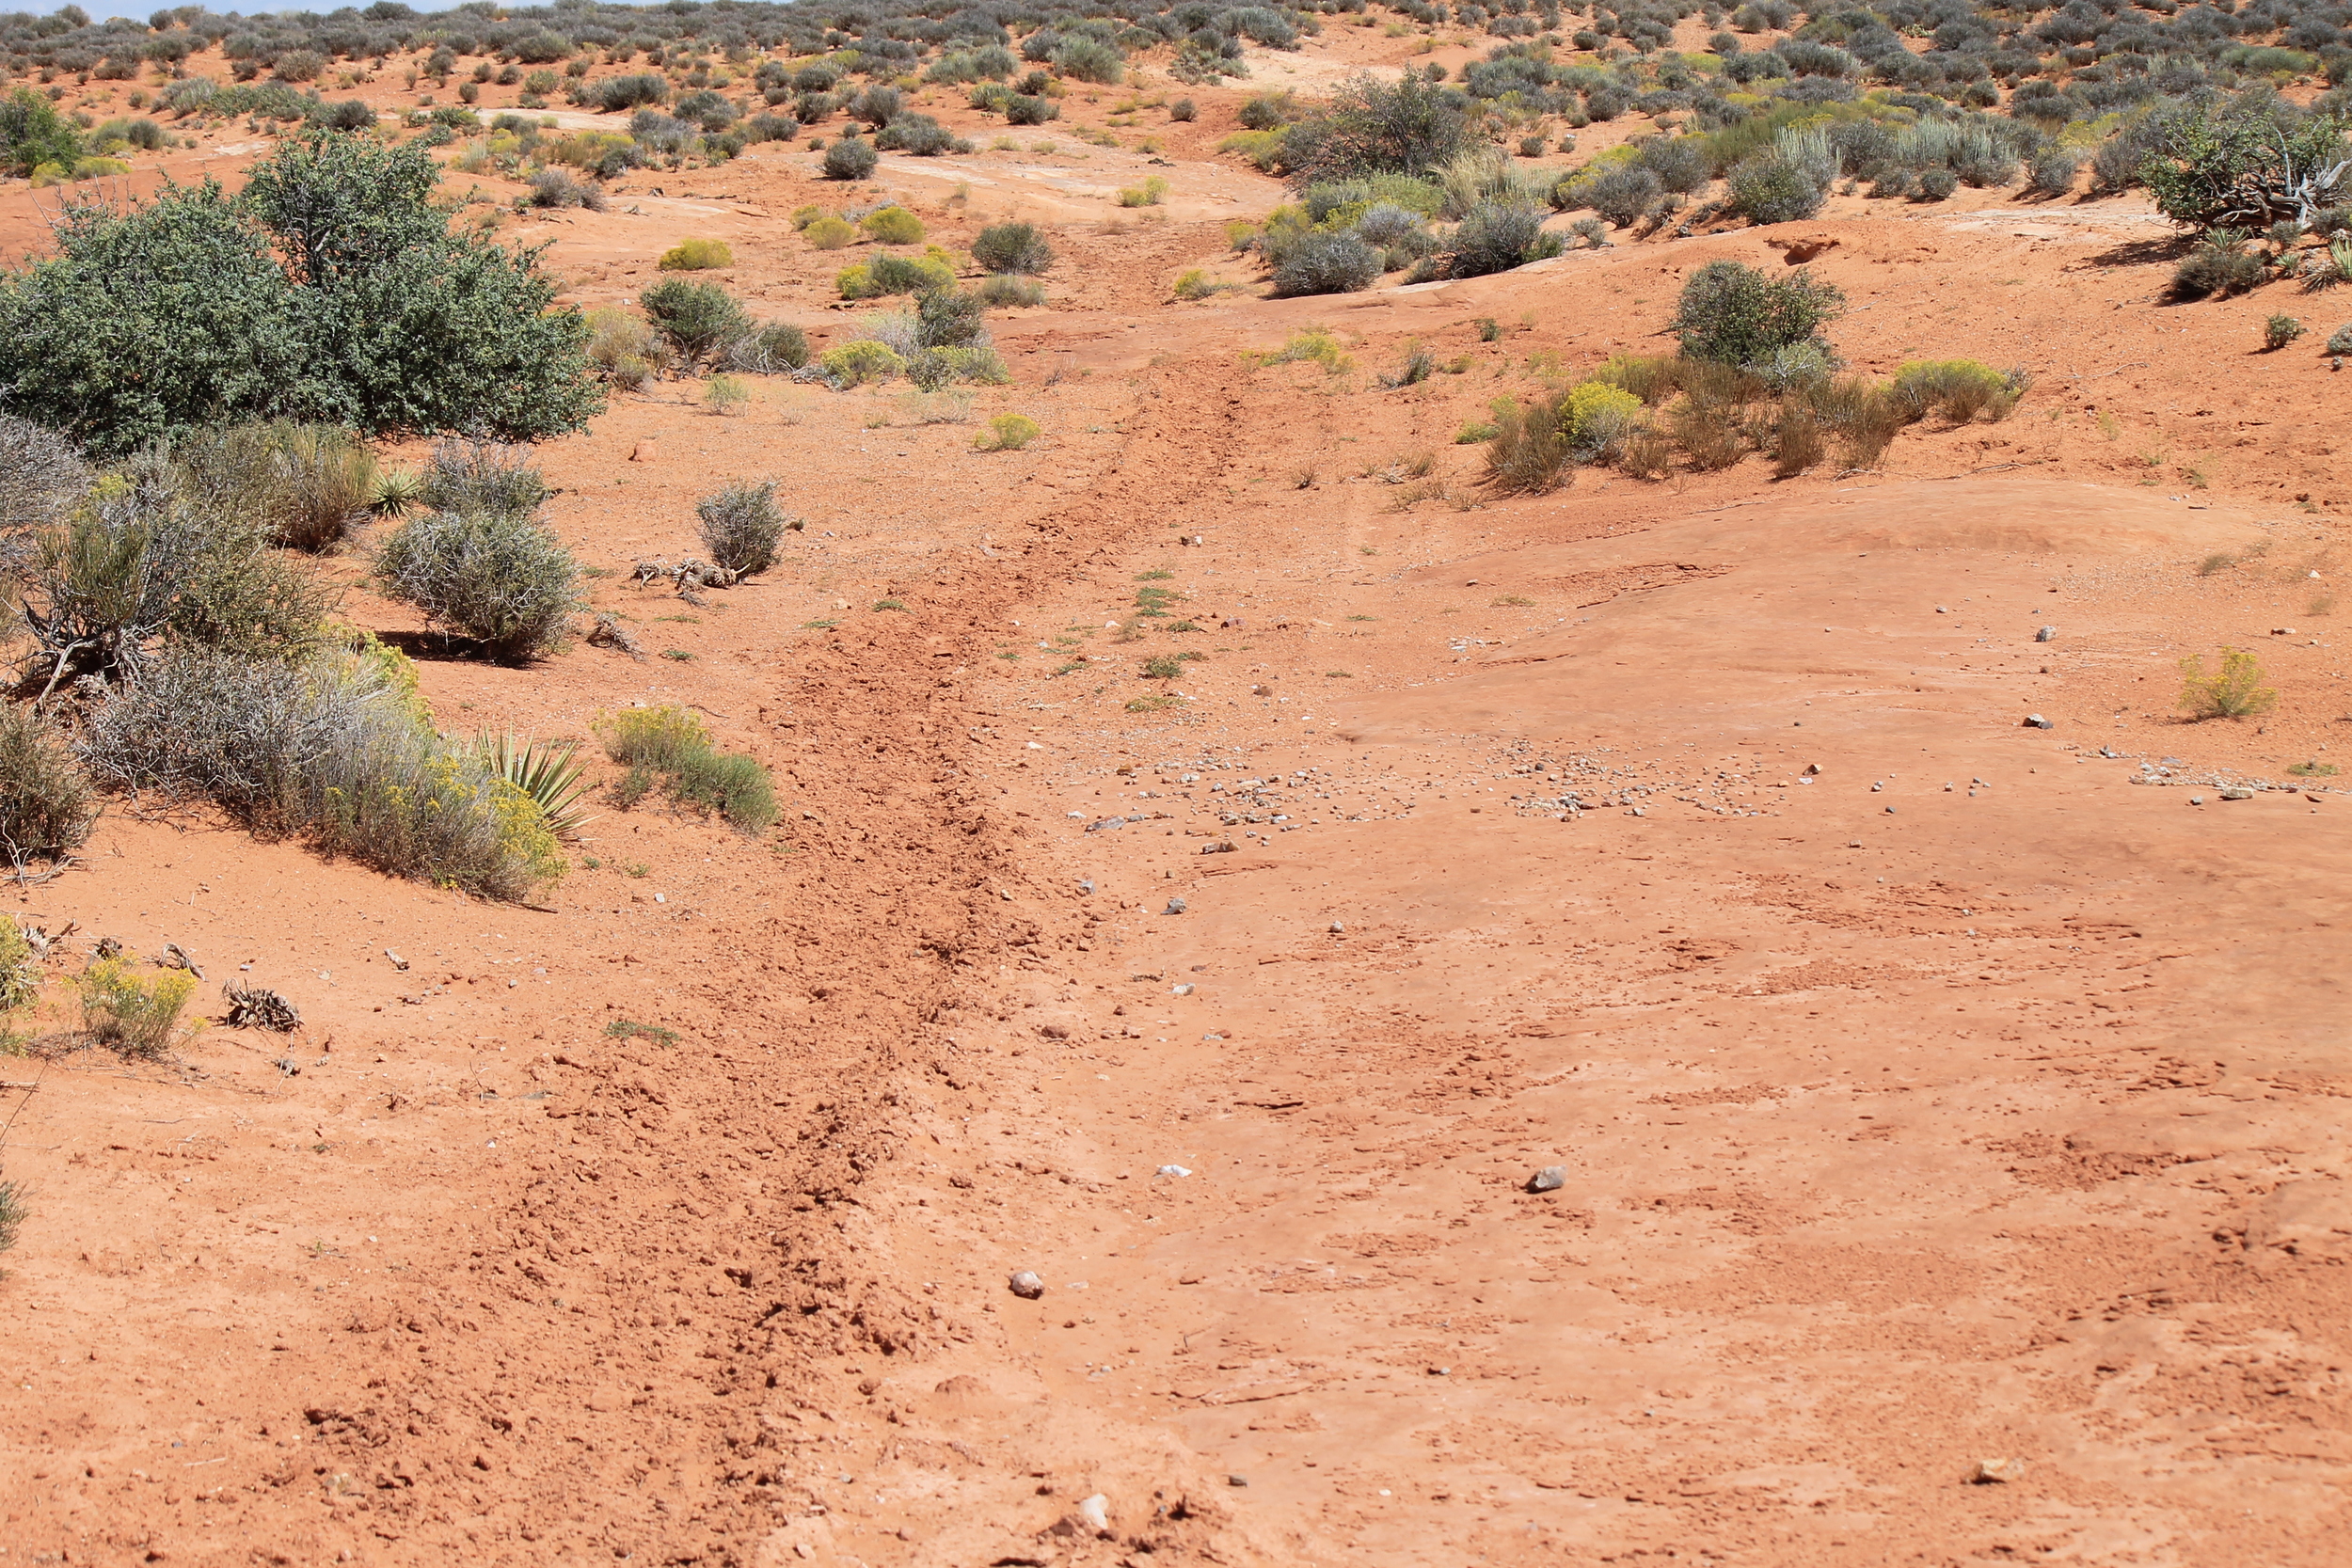 Mustang trail through the red sands of Sweetwater Reef